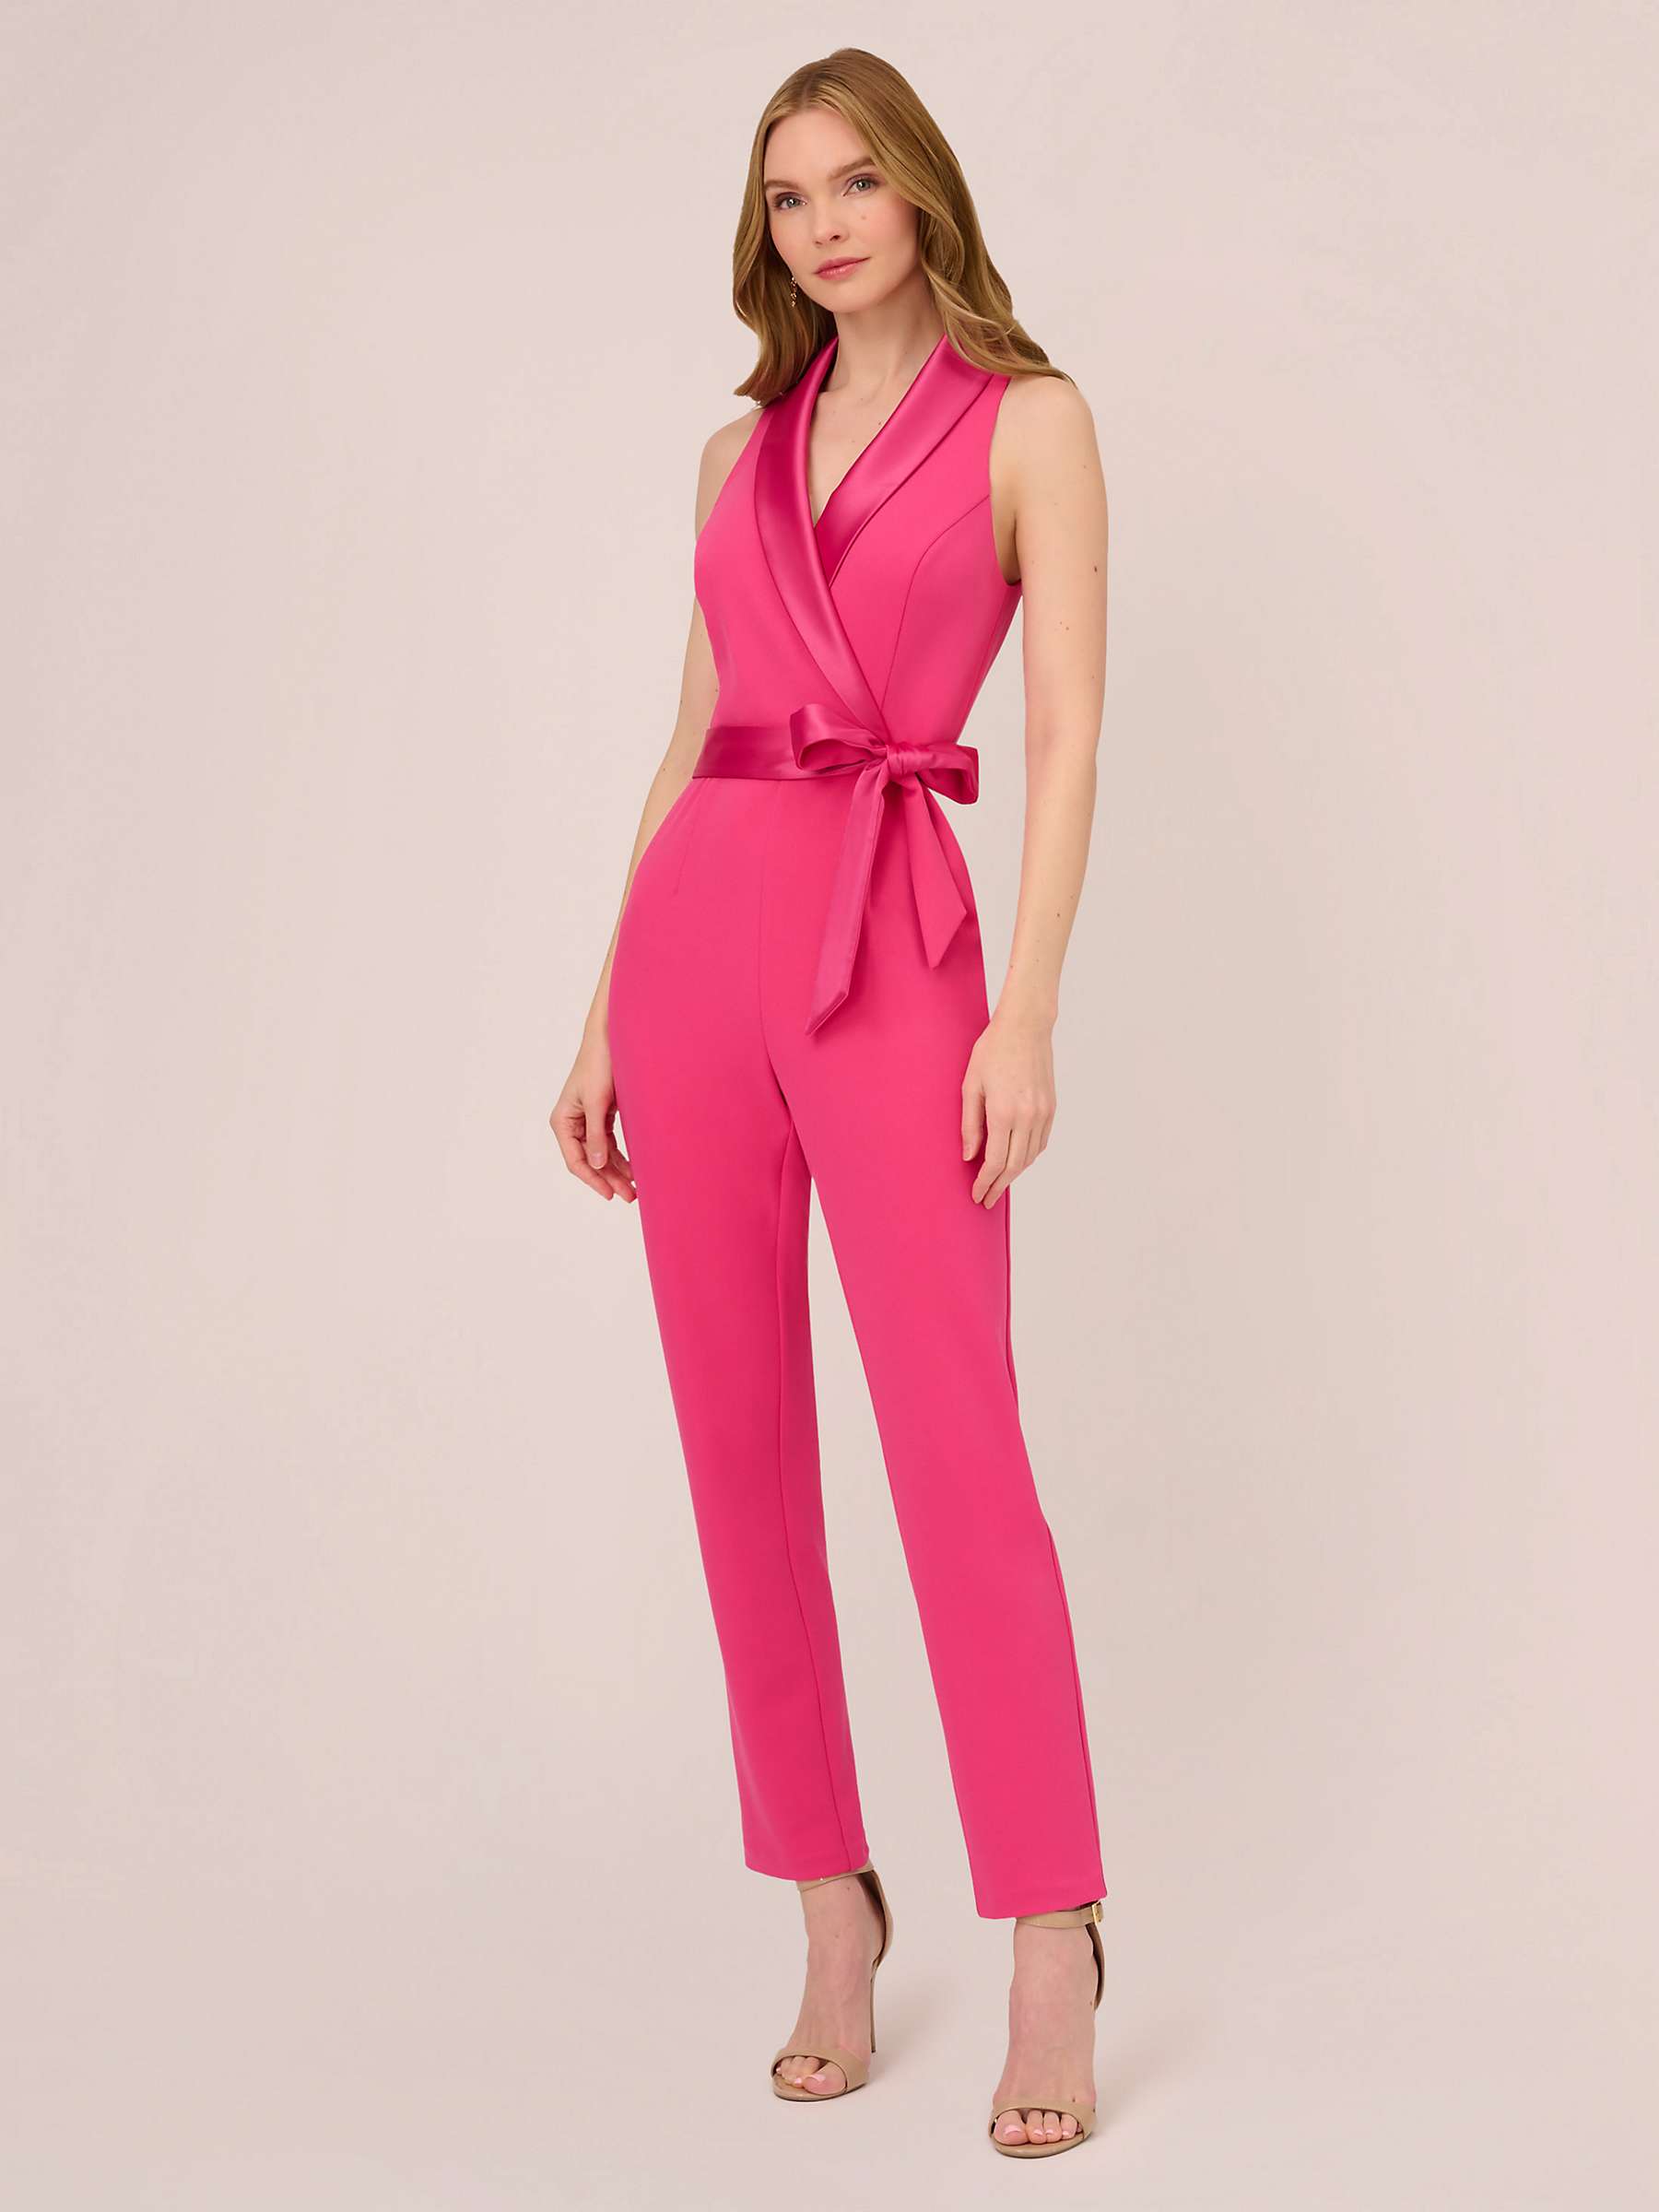 Buy Adrianna Papell Knit Crepe Tuxedo Jumpsuit, Cabaret Pink Online at johnlewis.com